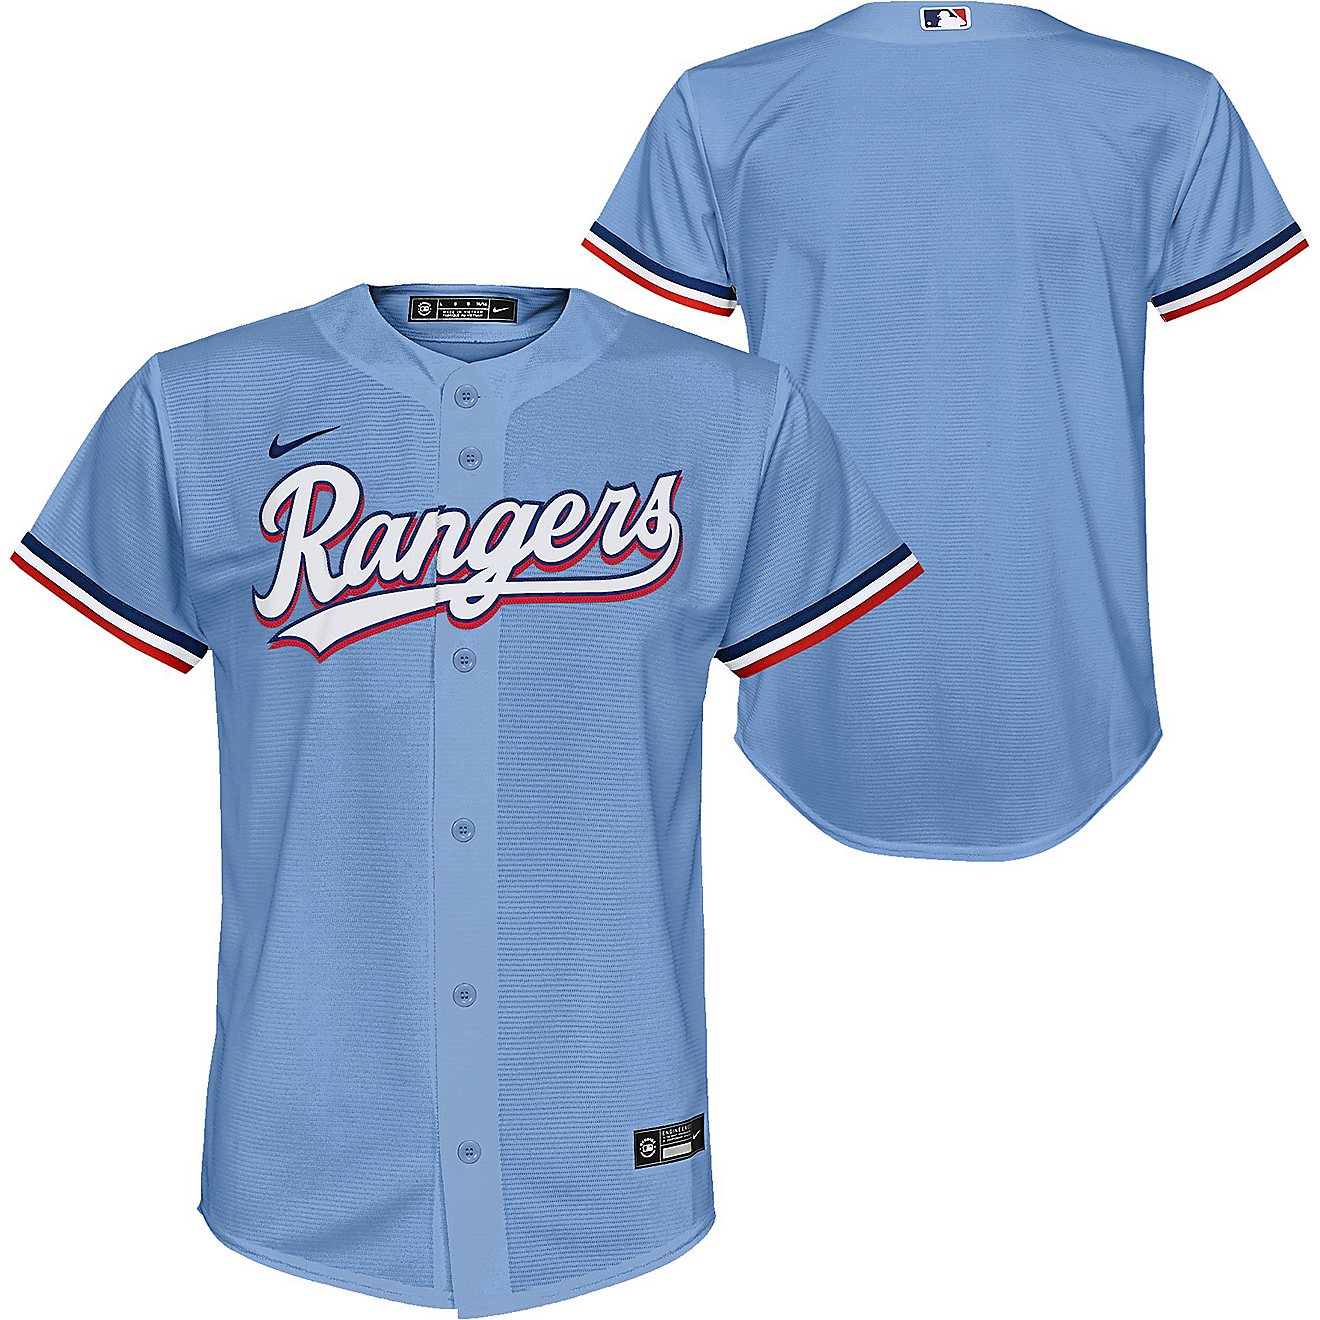 Nike Youth Texas Rangers Away Alternate Replica Jersey                                                                           - view number 1